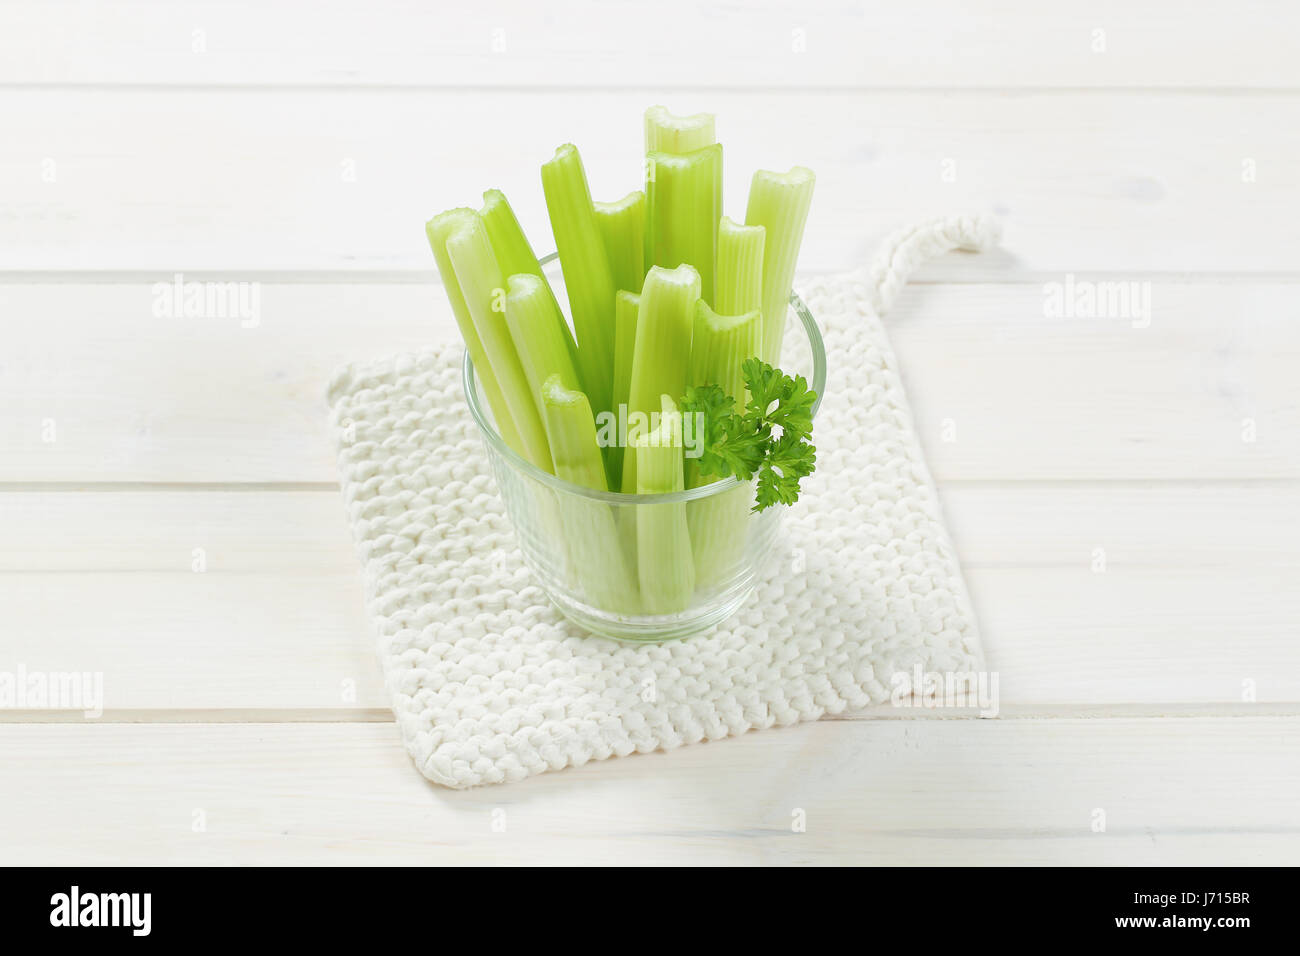 glass of green celery stems on white table mat Stock Photo